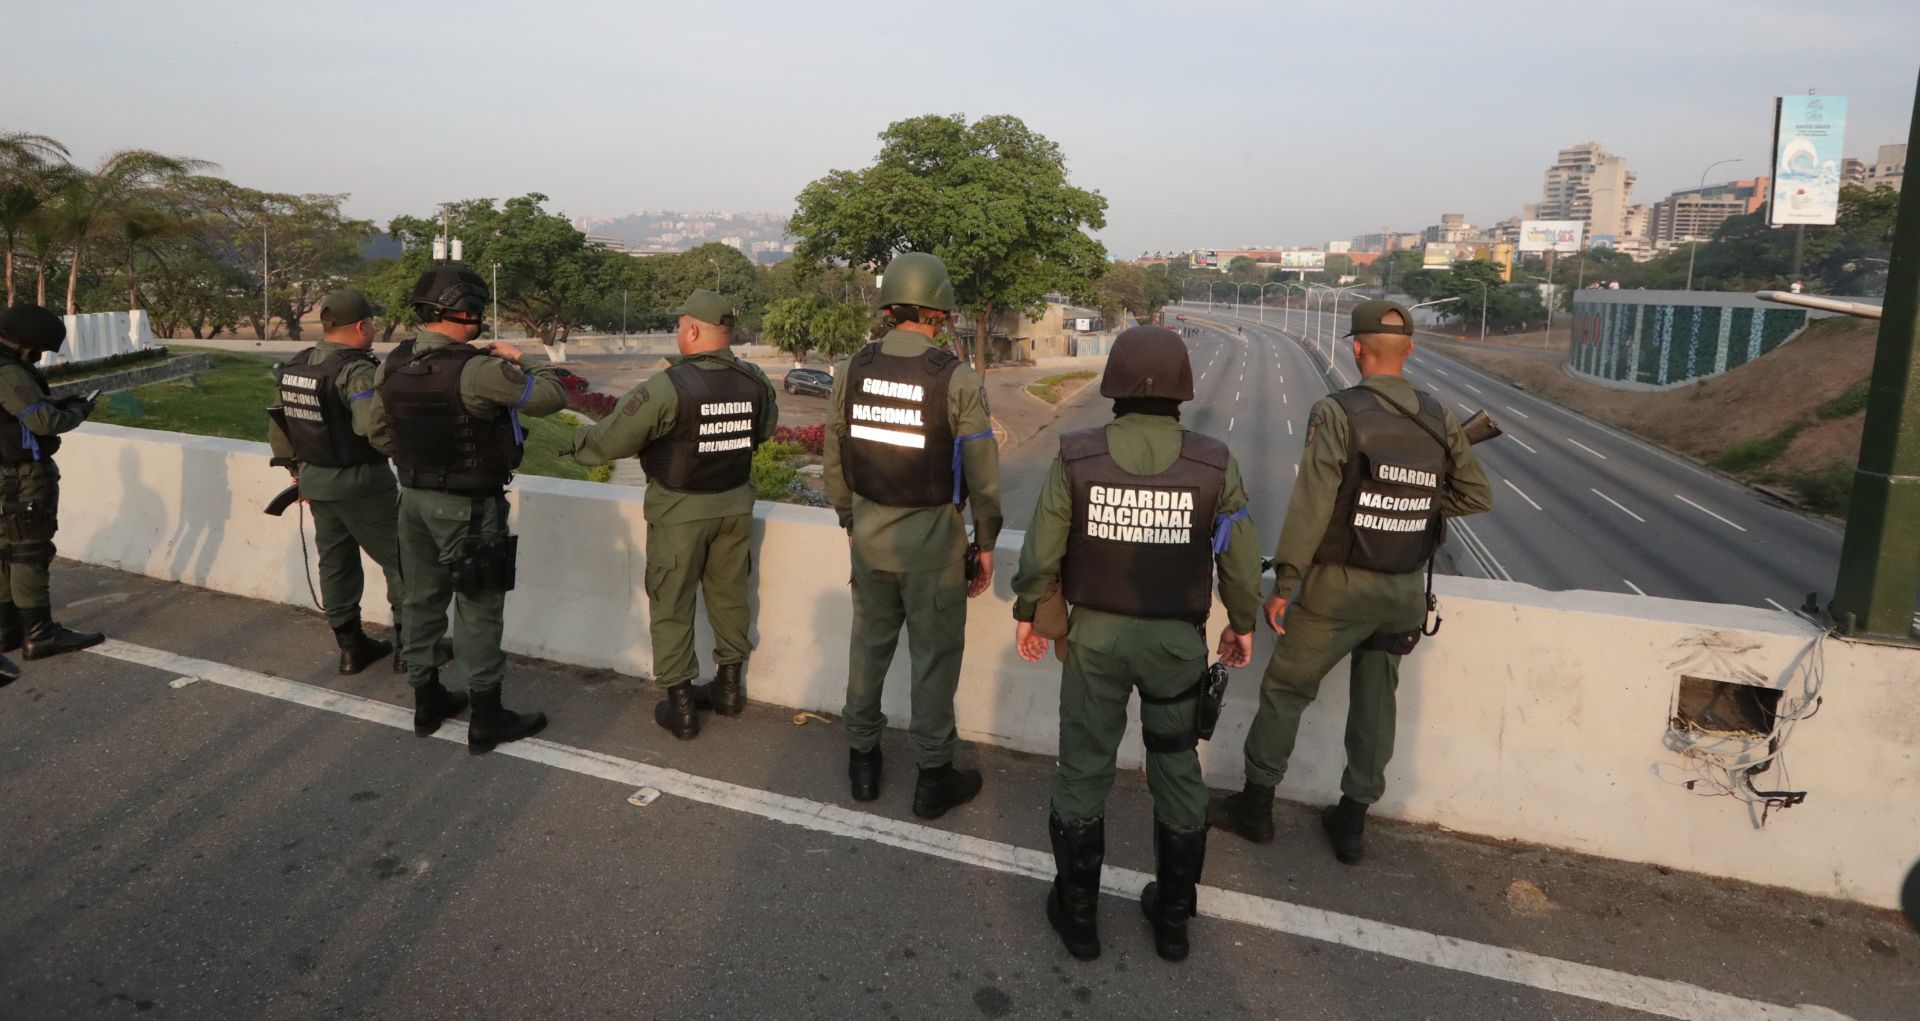 epa07537825 Venezuelan National Guard members on duty at La Carlota base, in eastern Caracas, Venezuela, 30 April 2019, where Venezuelan opposition Leopoldo Lopez (unseen) was led to meet with interim President Juan Guaido after being released from his home following his house arrest. Venezuelan interim President Juan Guaido has asked supporters to take to the streets in order to end the regime of President Nicolas Maduro. Meanwhile, Venezuelan opposition leader Leopoldo Lopez was freed from his house arrest, appearing alongside Guaido and military forces in Caracas.  EPA/RAYNER PENA